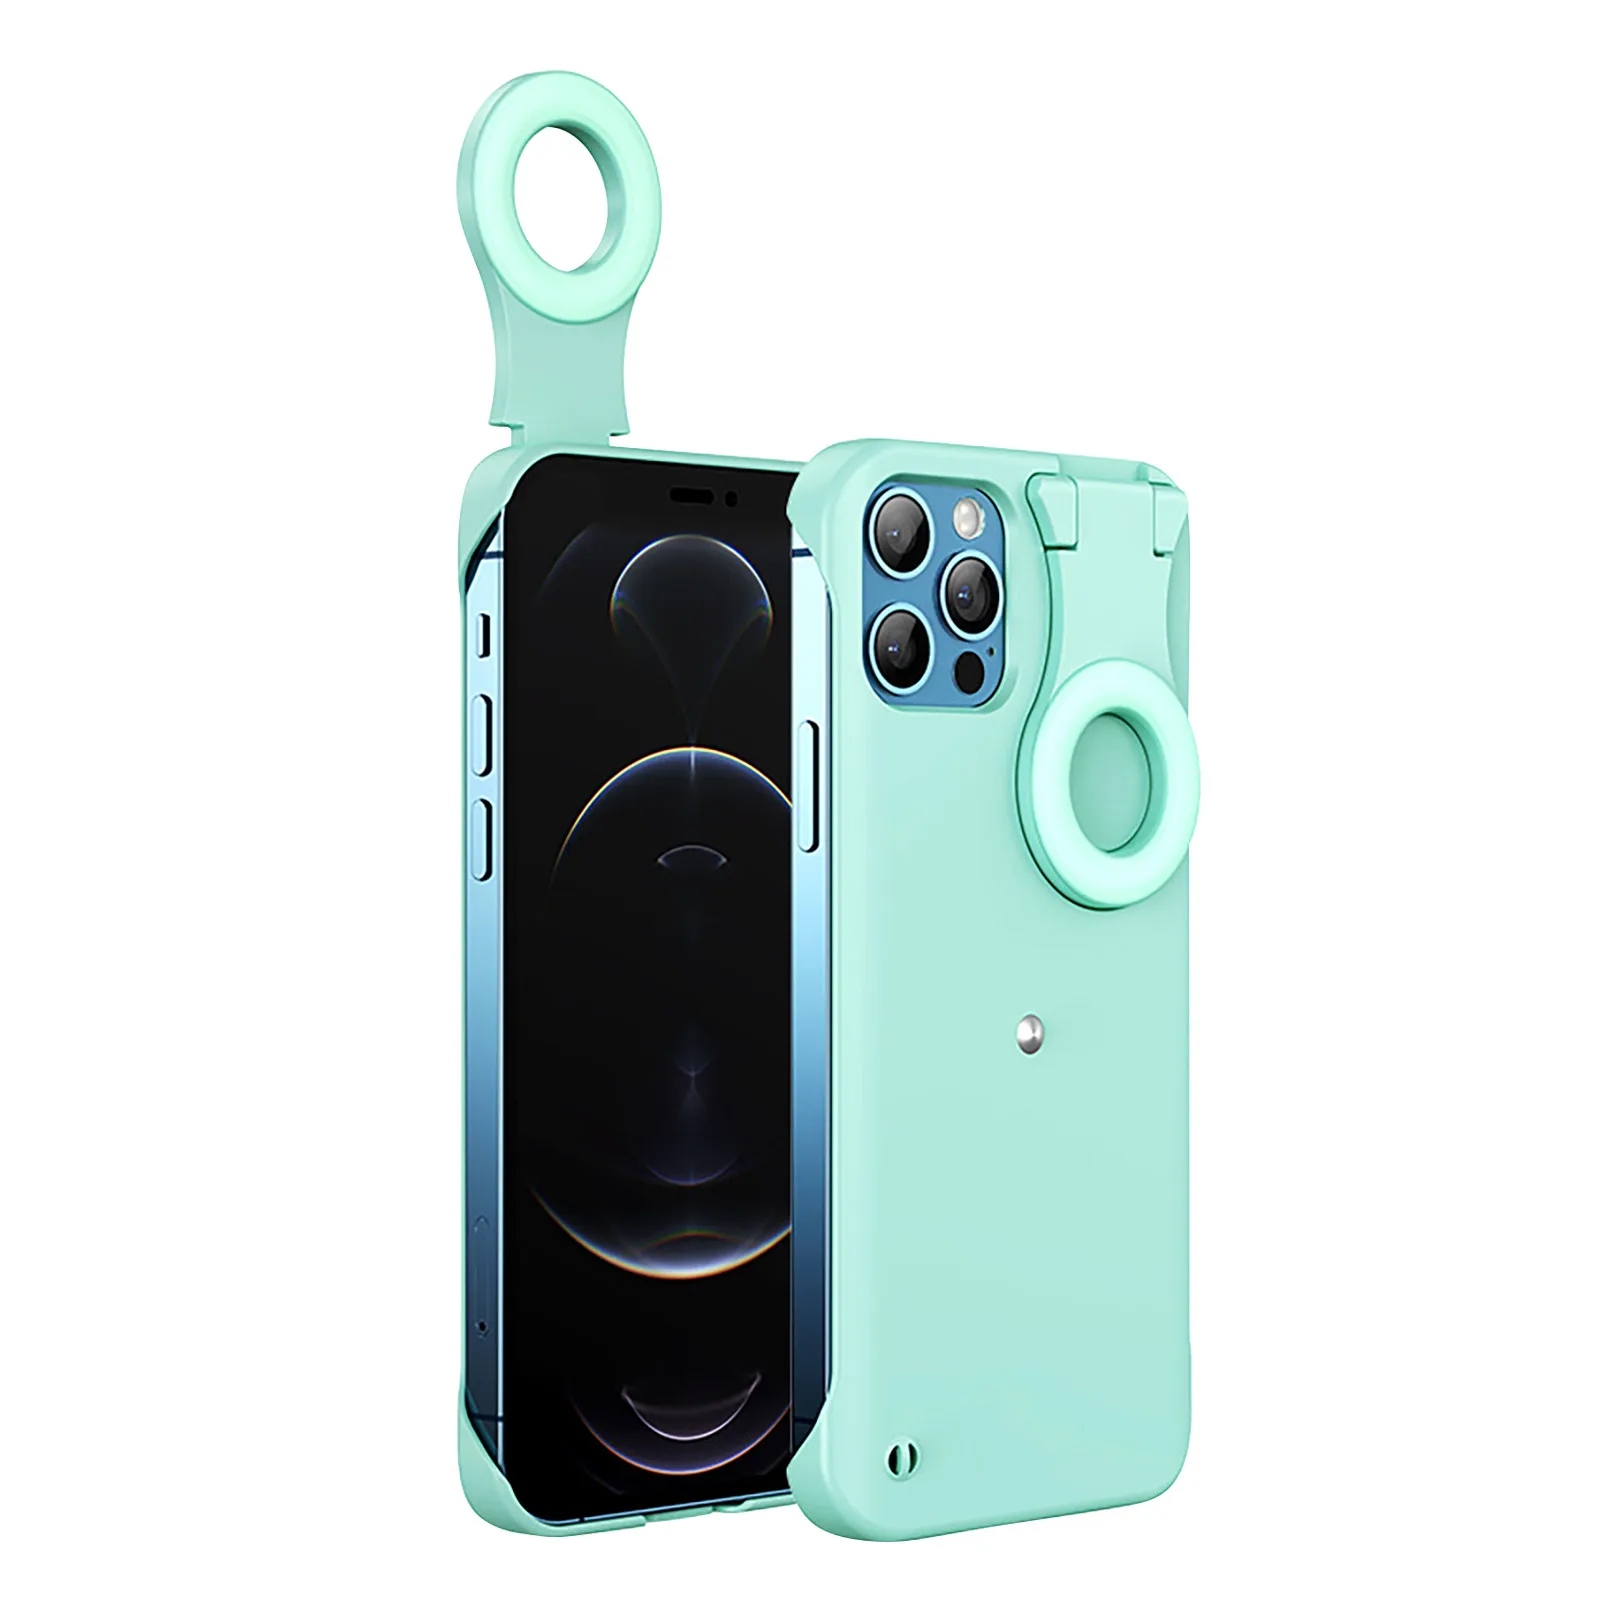 

cell Phone capa de celular Fill light Back shell led light mirror with selfie stick neon phone case for iphone 12 pro, Multicolor